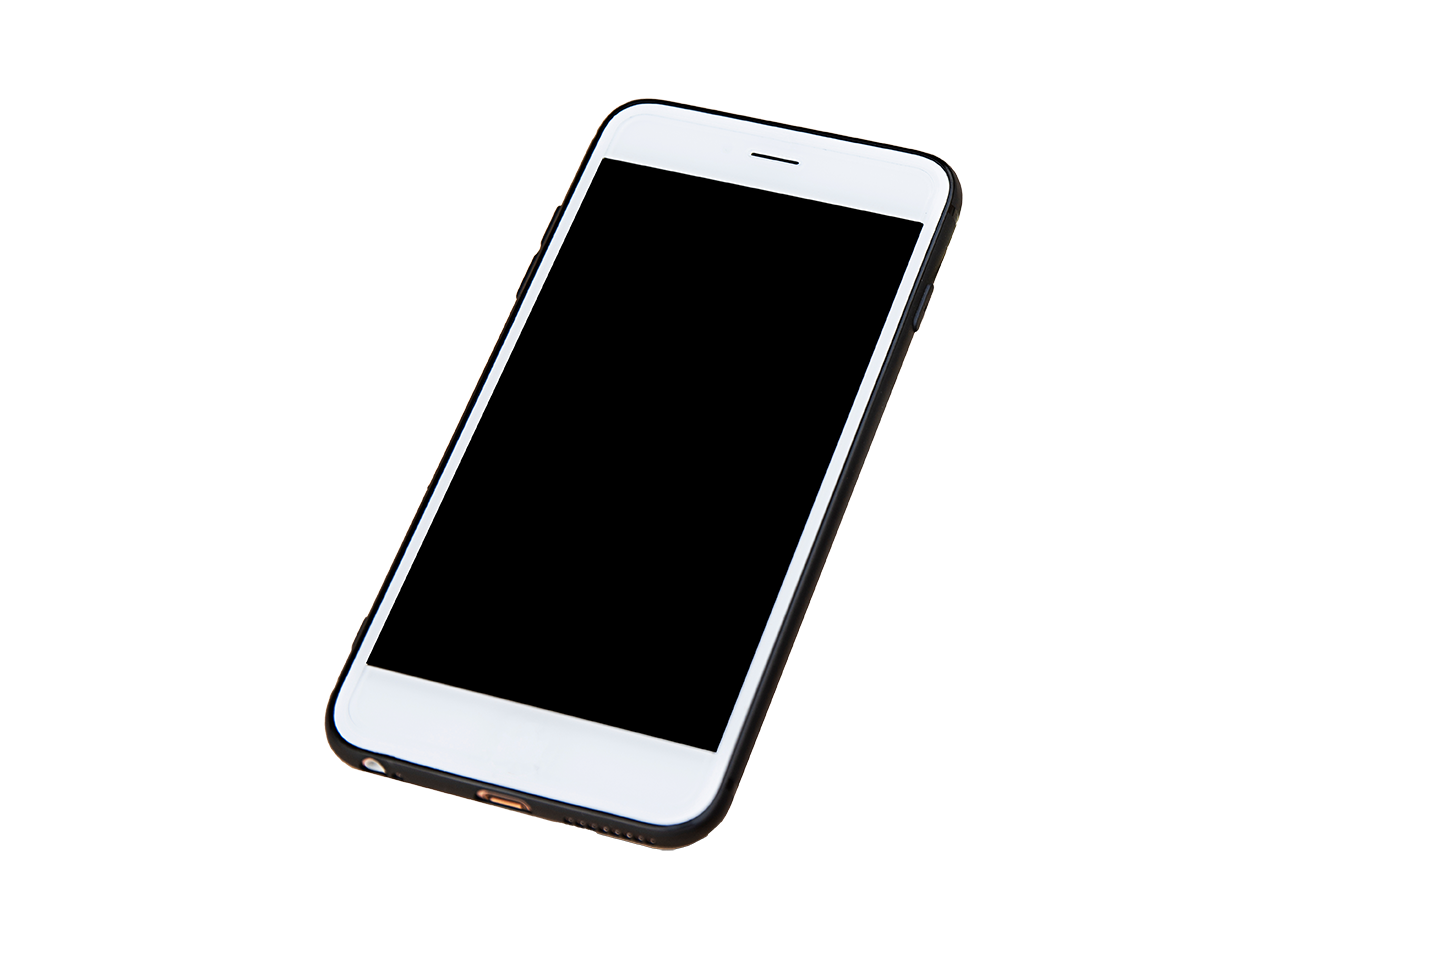 Abracon’s ultra-miniature crystals are ideal for mobile phones across a wide operating temperature range.